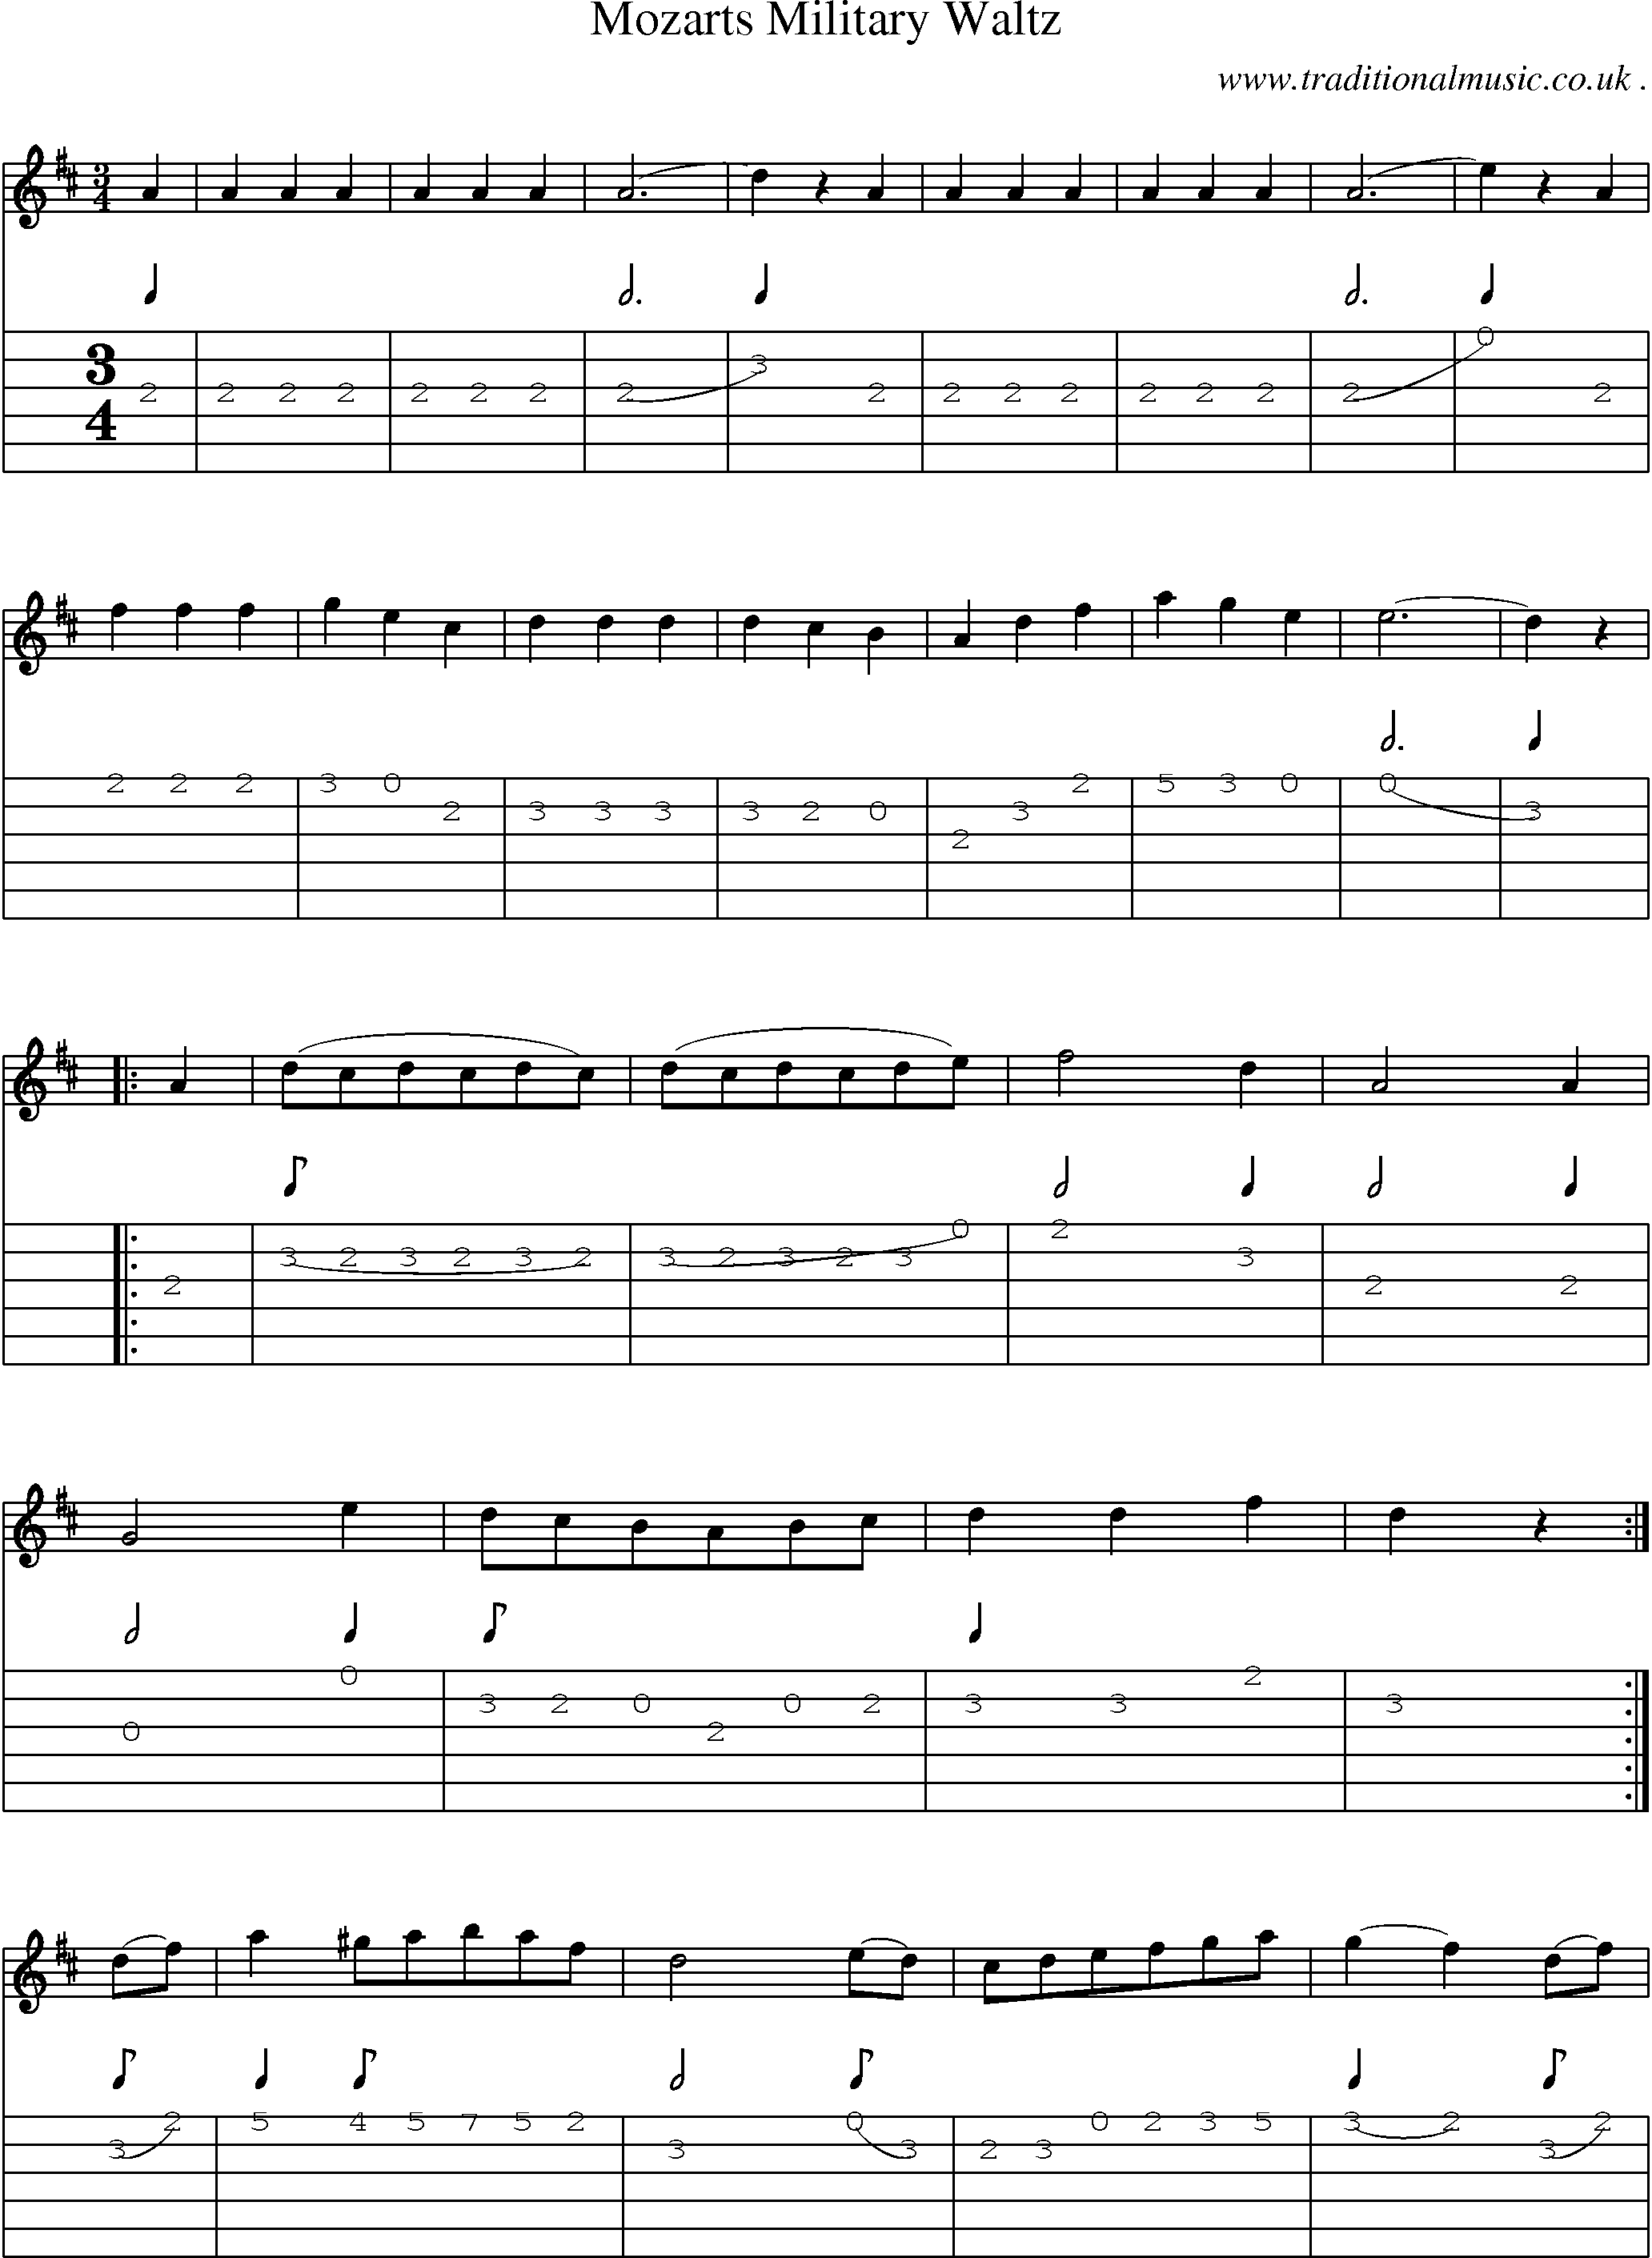 Sheet-Music and Guitar Tabs for Mozarts Military Waltz